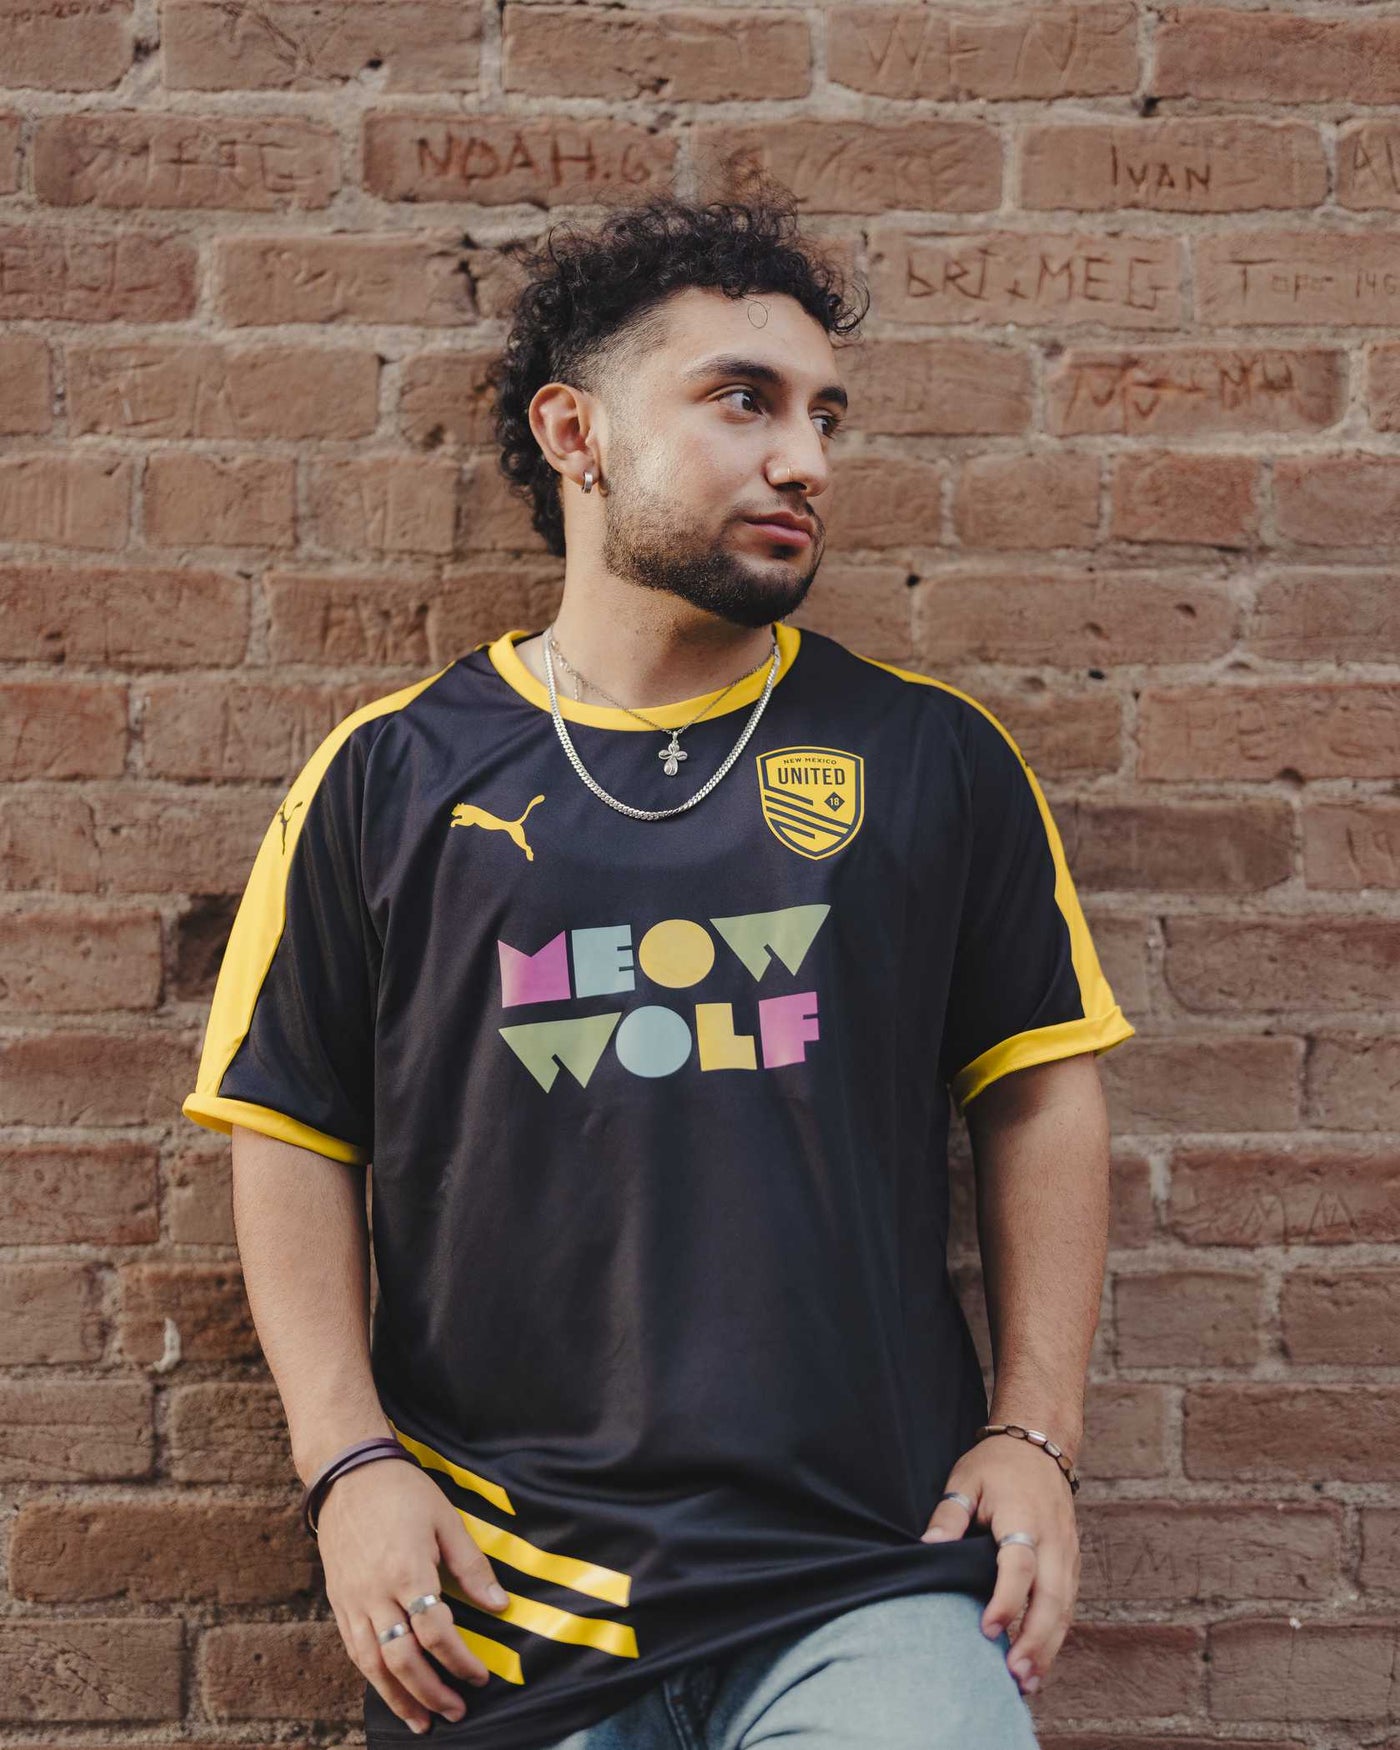 2020 Meow Wolf Unisex Home Jersey